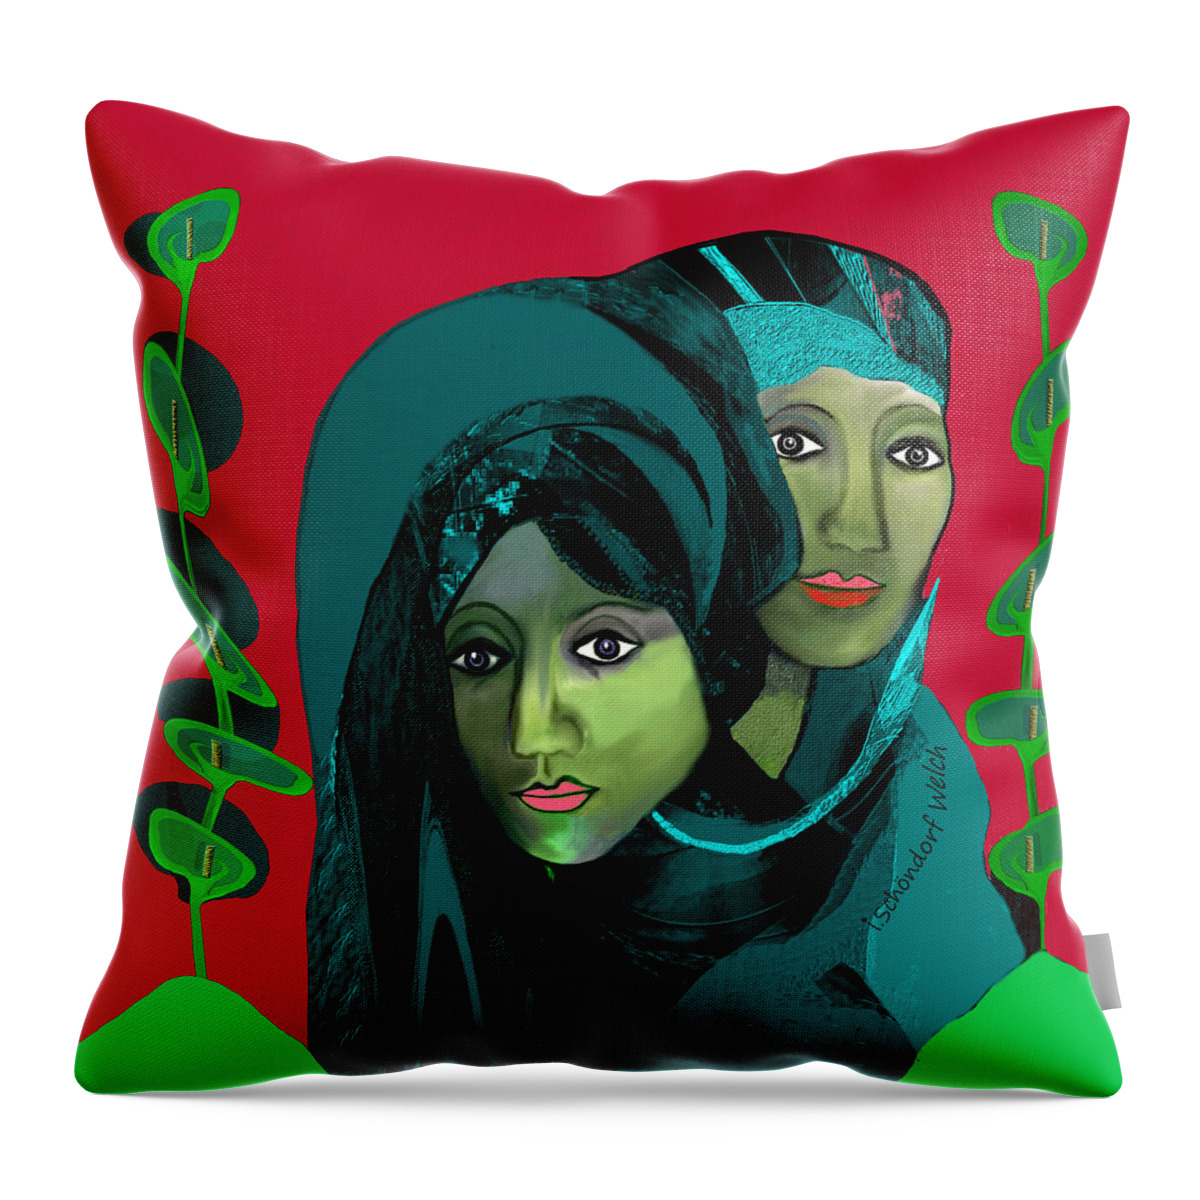 1976 - Gloom Throw Pillow featuring the digital art 1976 - Gloom by Irmgard Schoendorf Welch